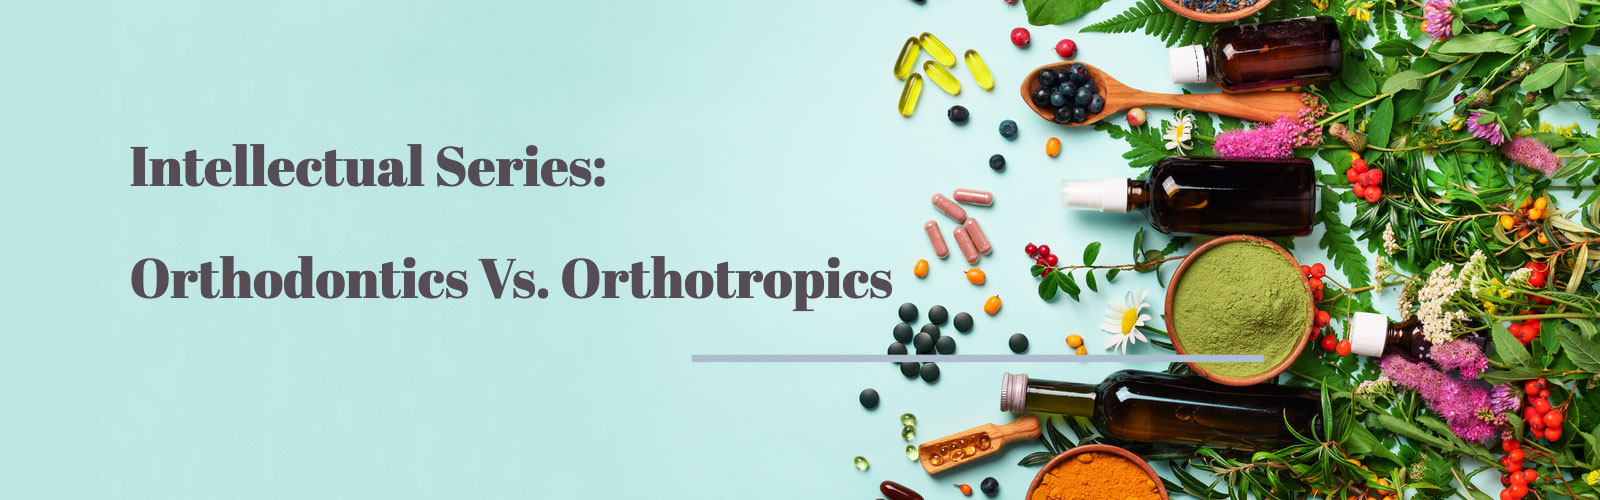 Straightening Out the Differences Between Orthodontics and Orthotropics